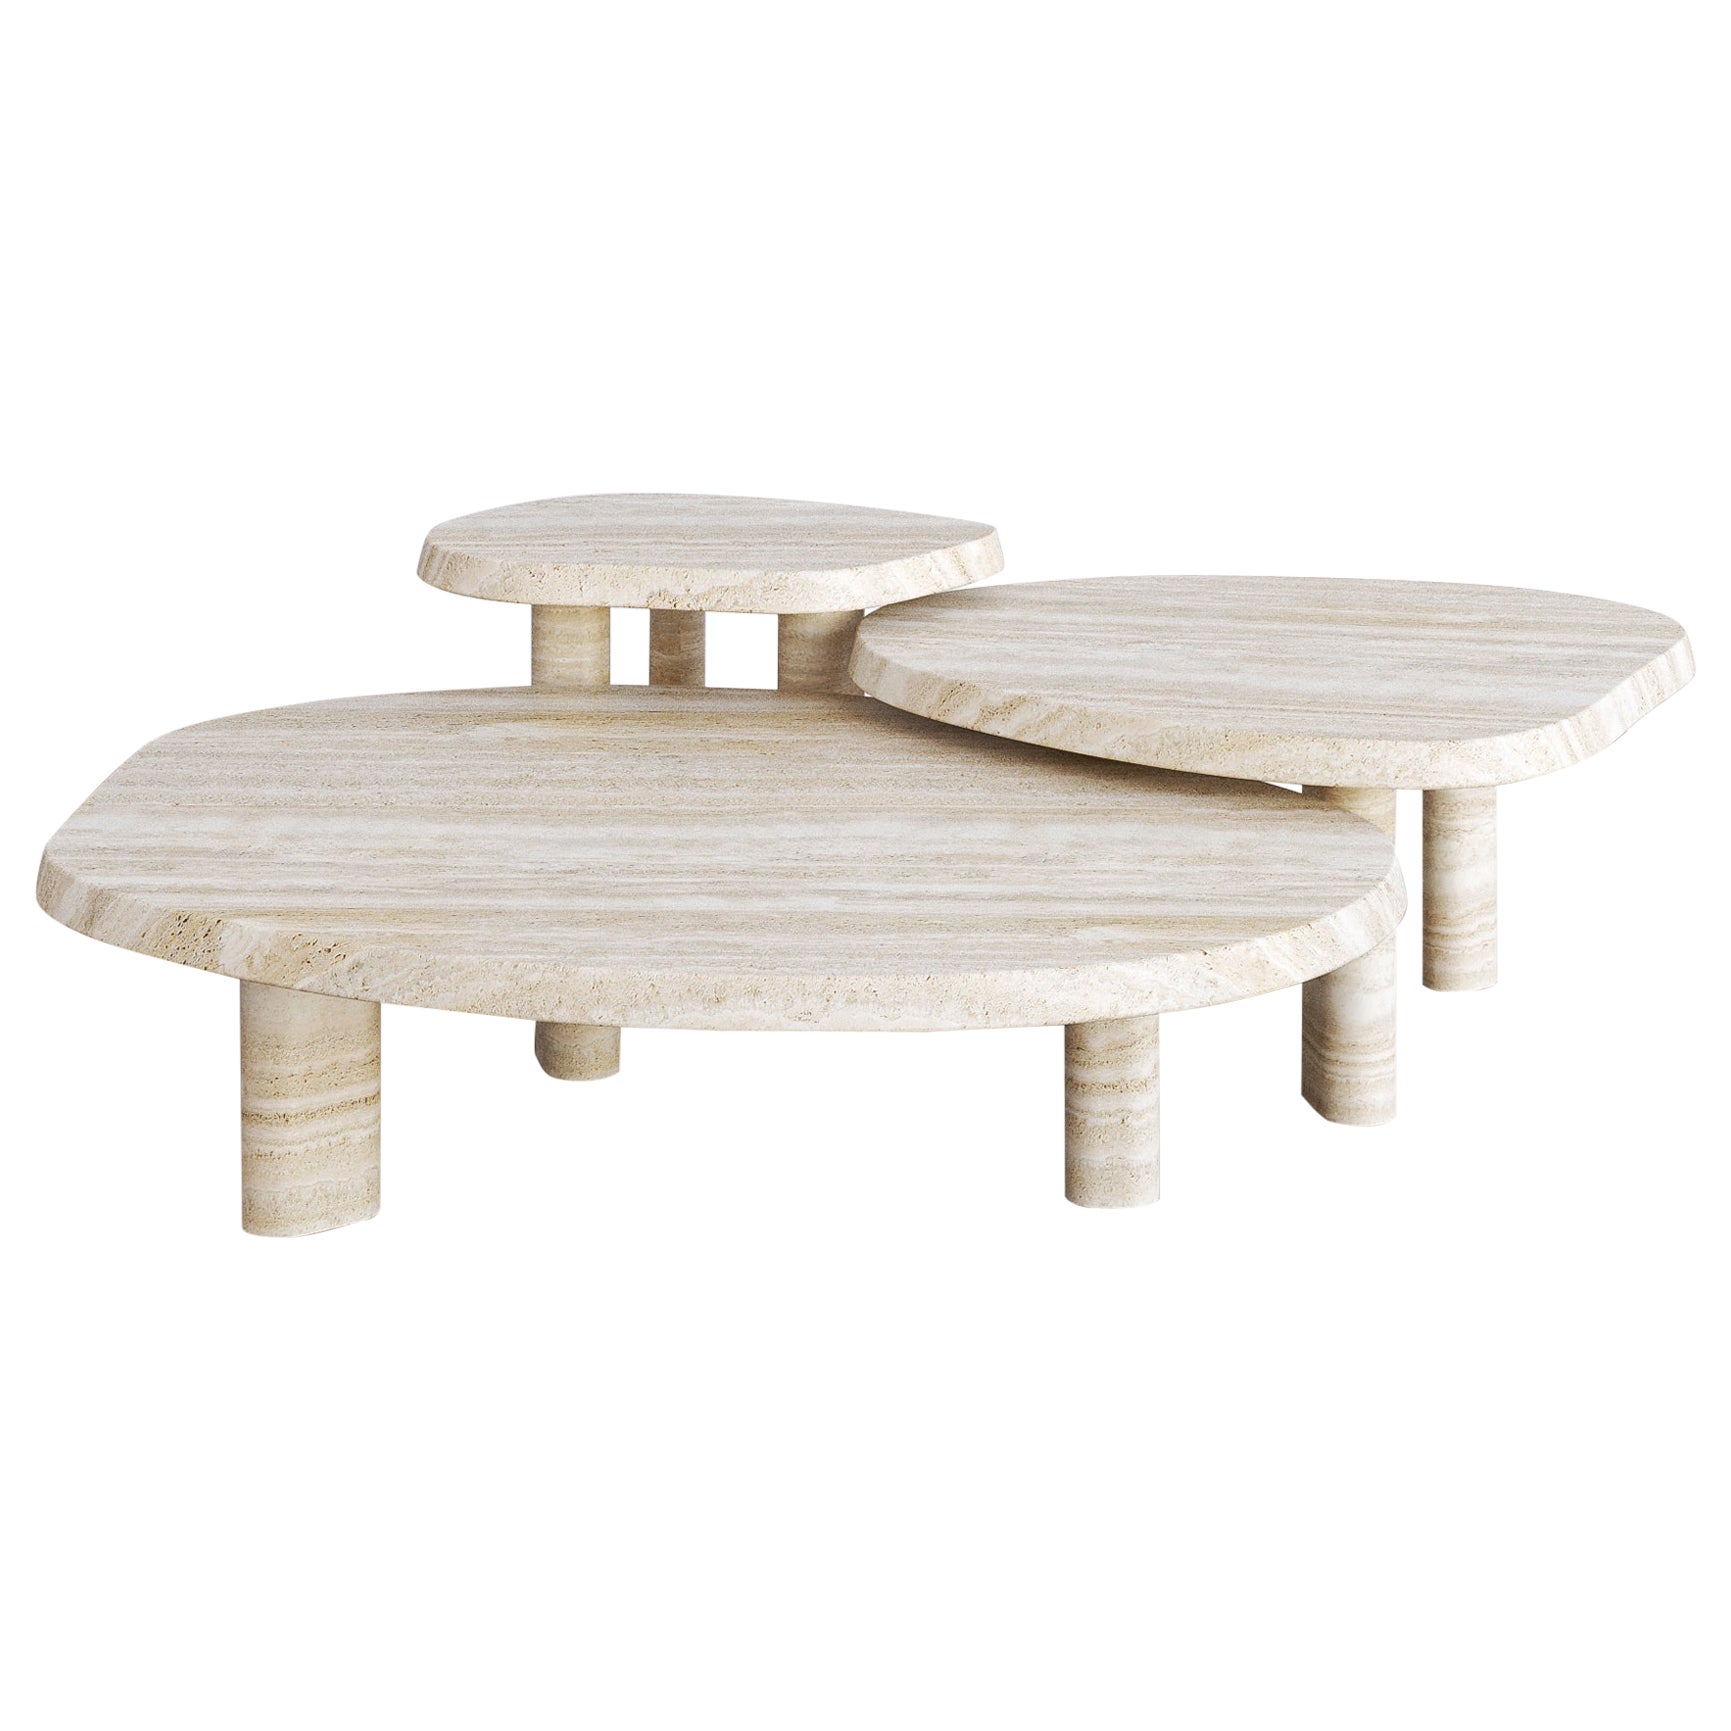 Nude Travertine Small Fiori Nesting Coffee Table by the Essentialist For Sale